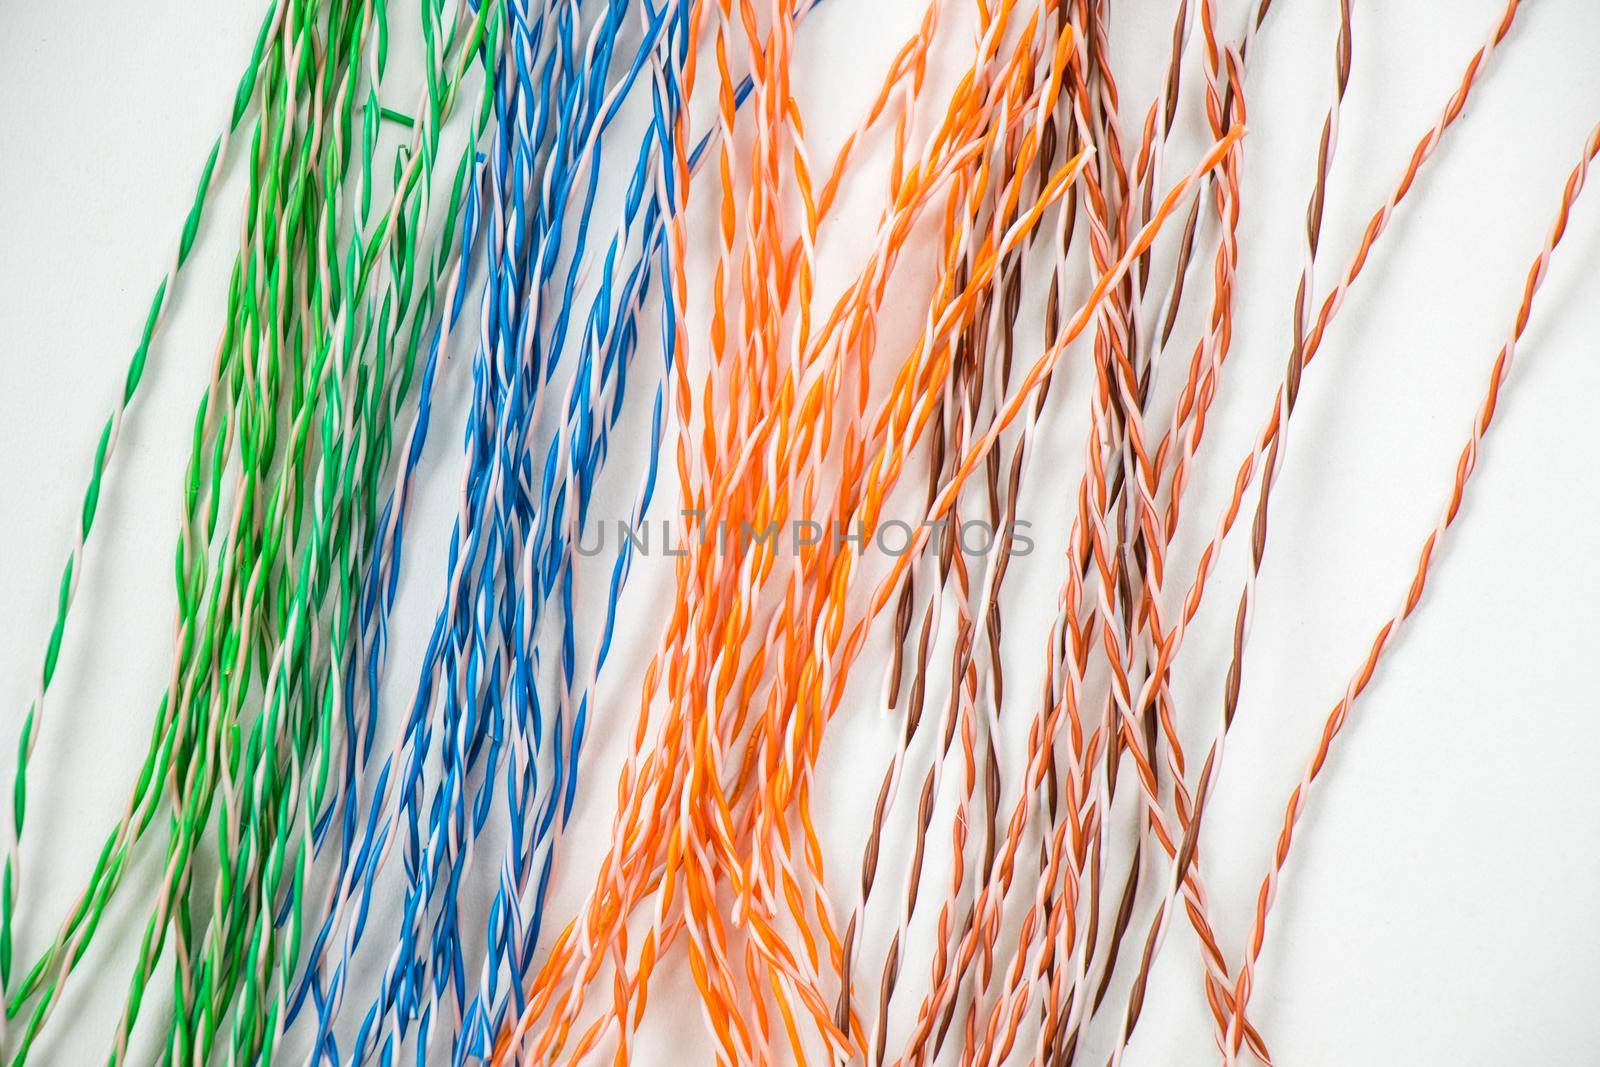 Internet cable on the white background by Taidundua